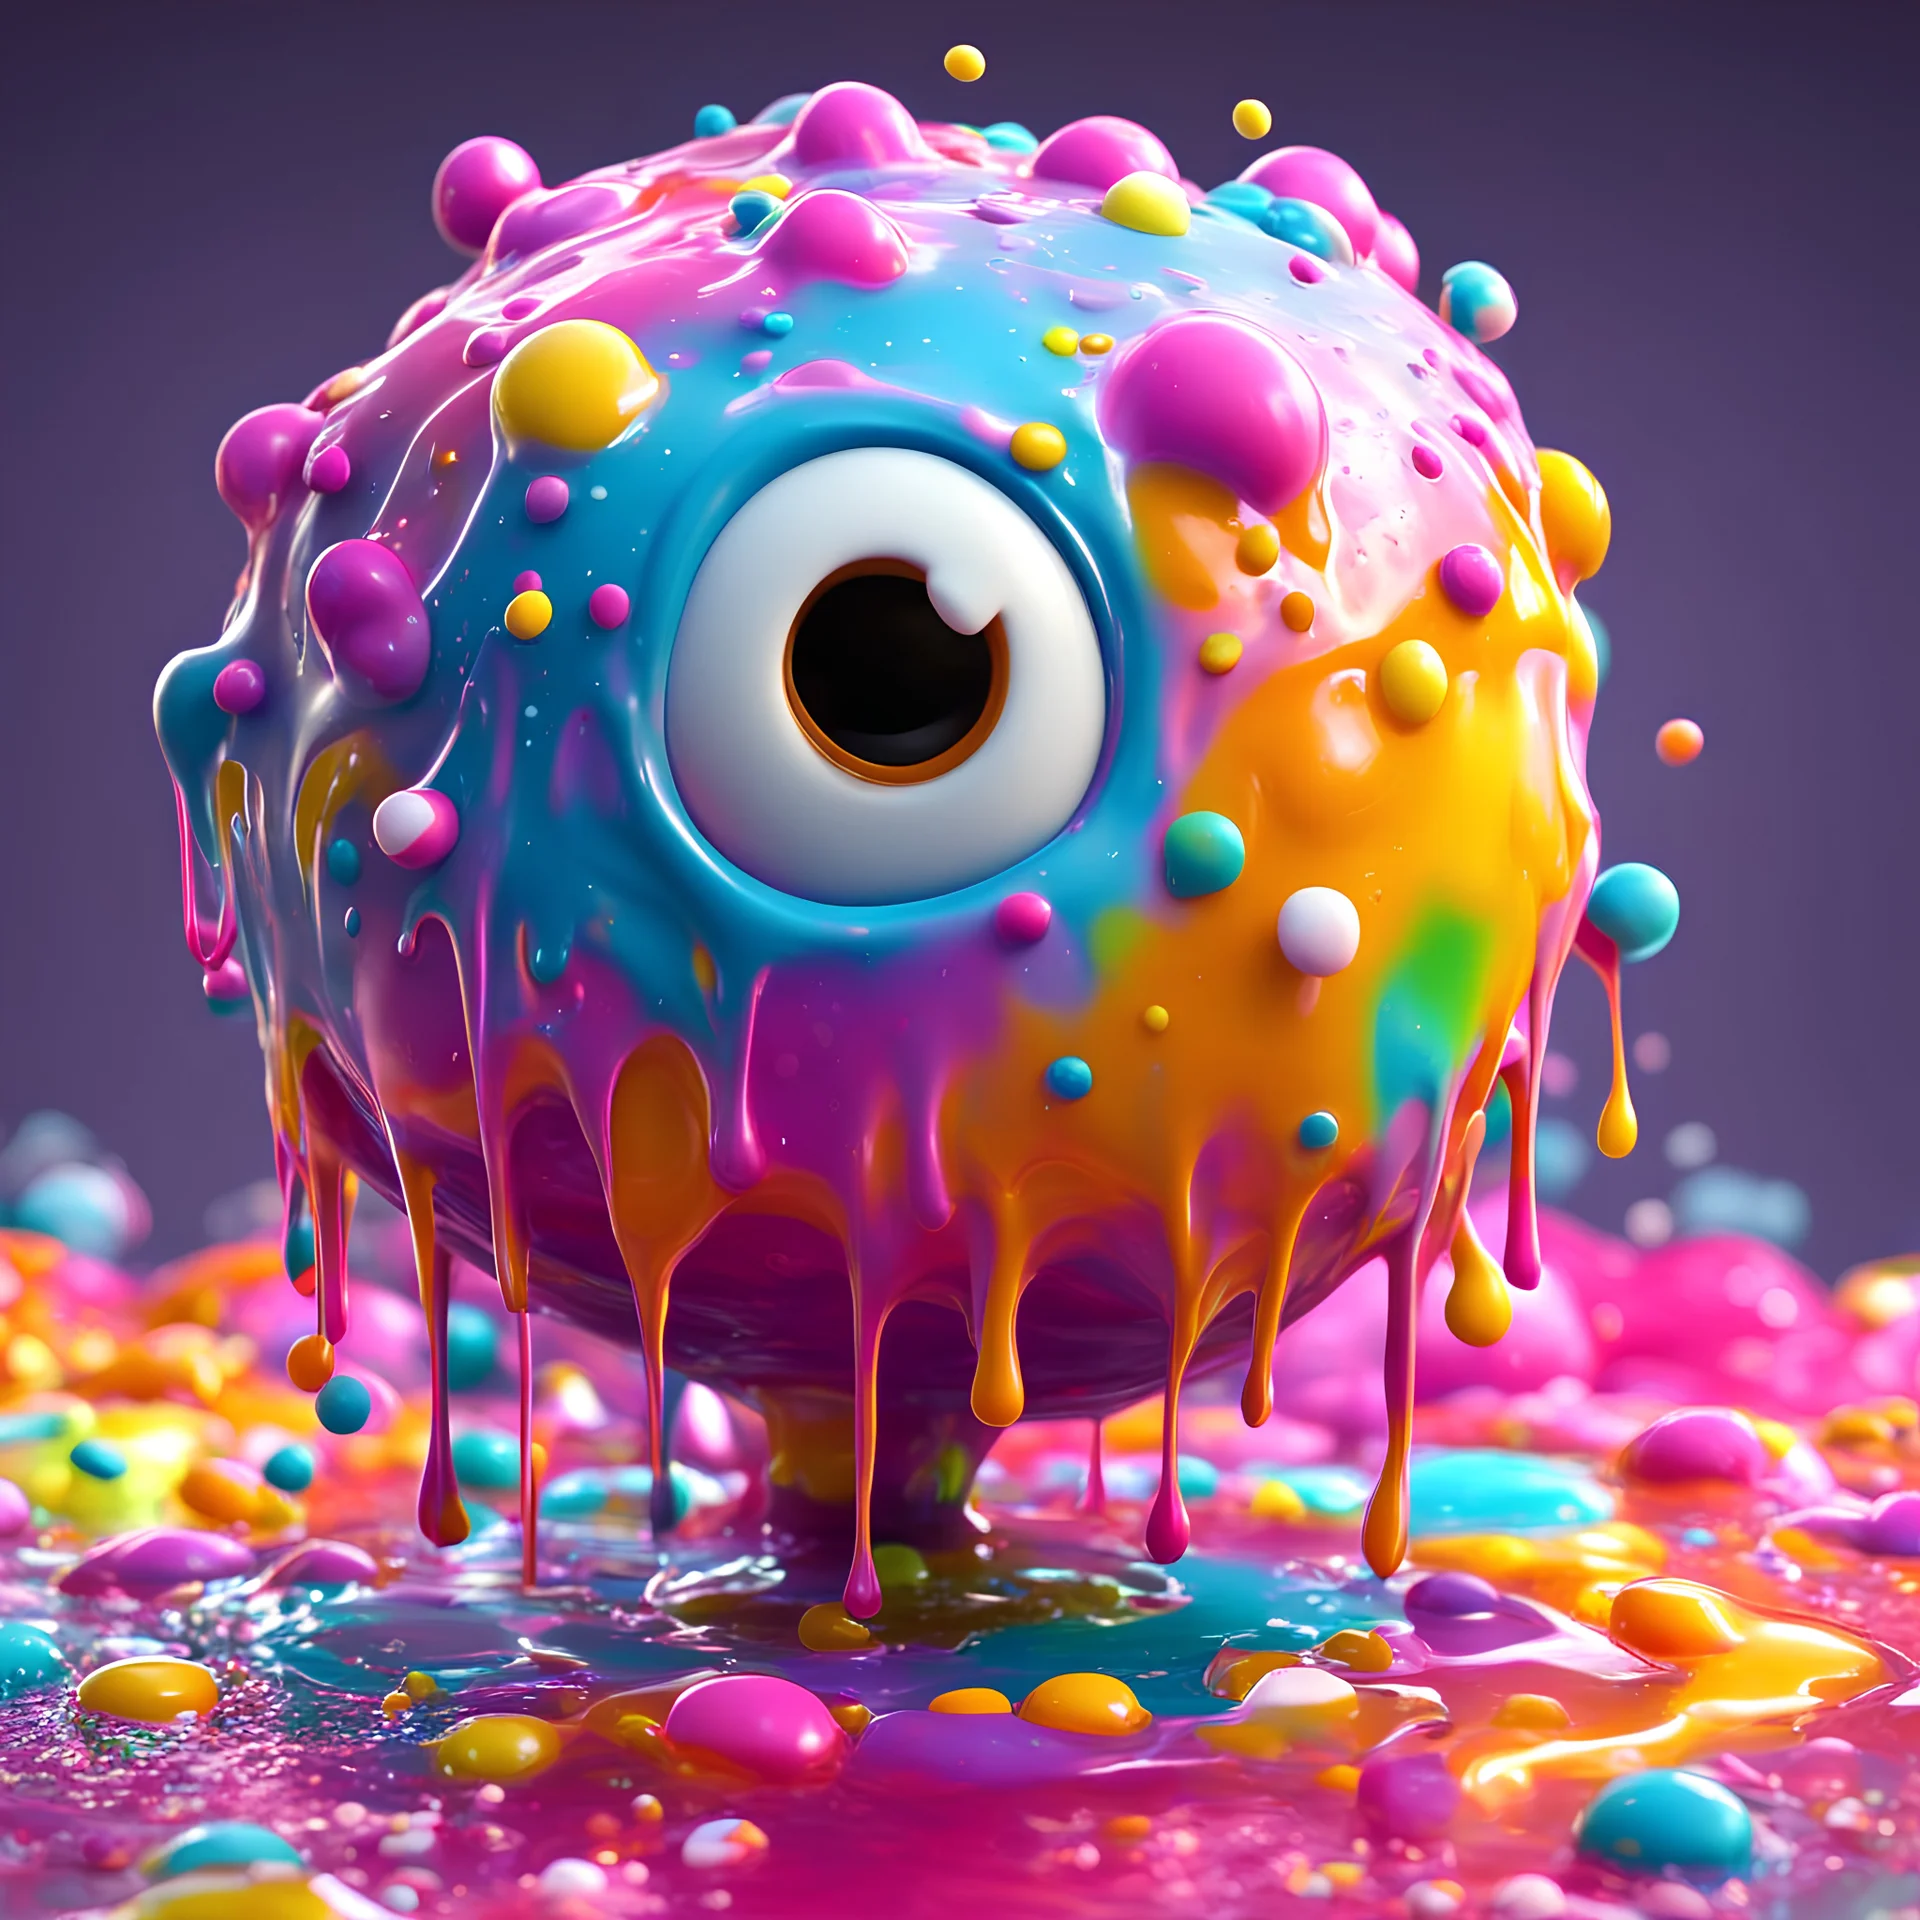 ((gooey melting creature)), Pixar style, 3D character, animated realism, fluid form, ((dripping bubblegum goo-like body)), adorable and cute, photorealistic cg, concept art, vibrant colours, standing, ((fun scary)) highly detailed, soft diffused lighting, stylised and expressive, wildly imaginative, coloured sprinkles, glazed marshmallows, chocolate toppings, smooth texture, cgsociety, pop surrealism, Recursive ray tracing, high fidelity, Houdini FX, mantra renderer